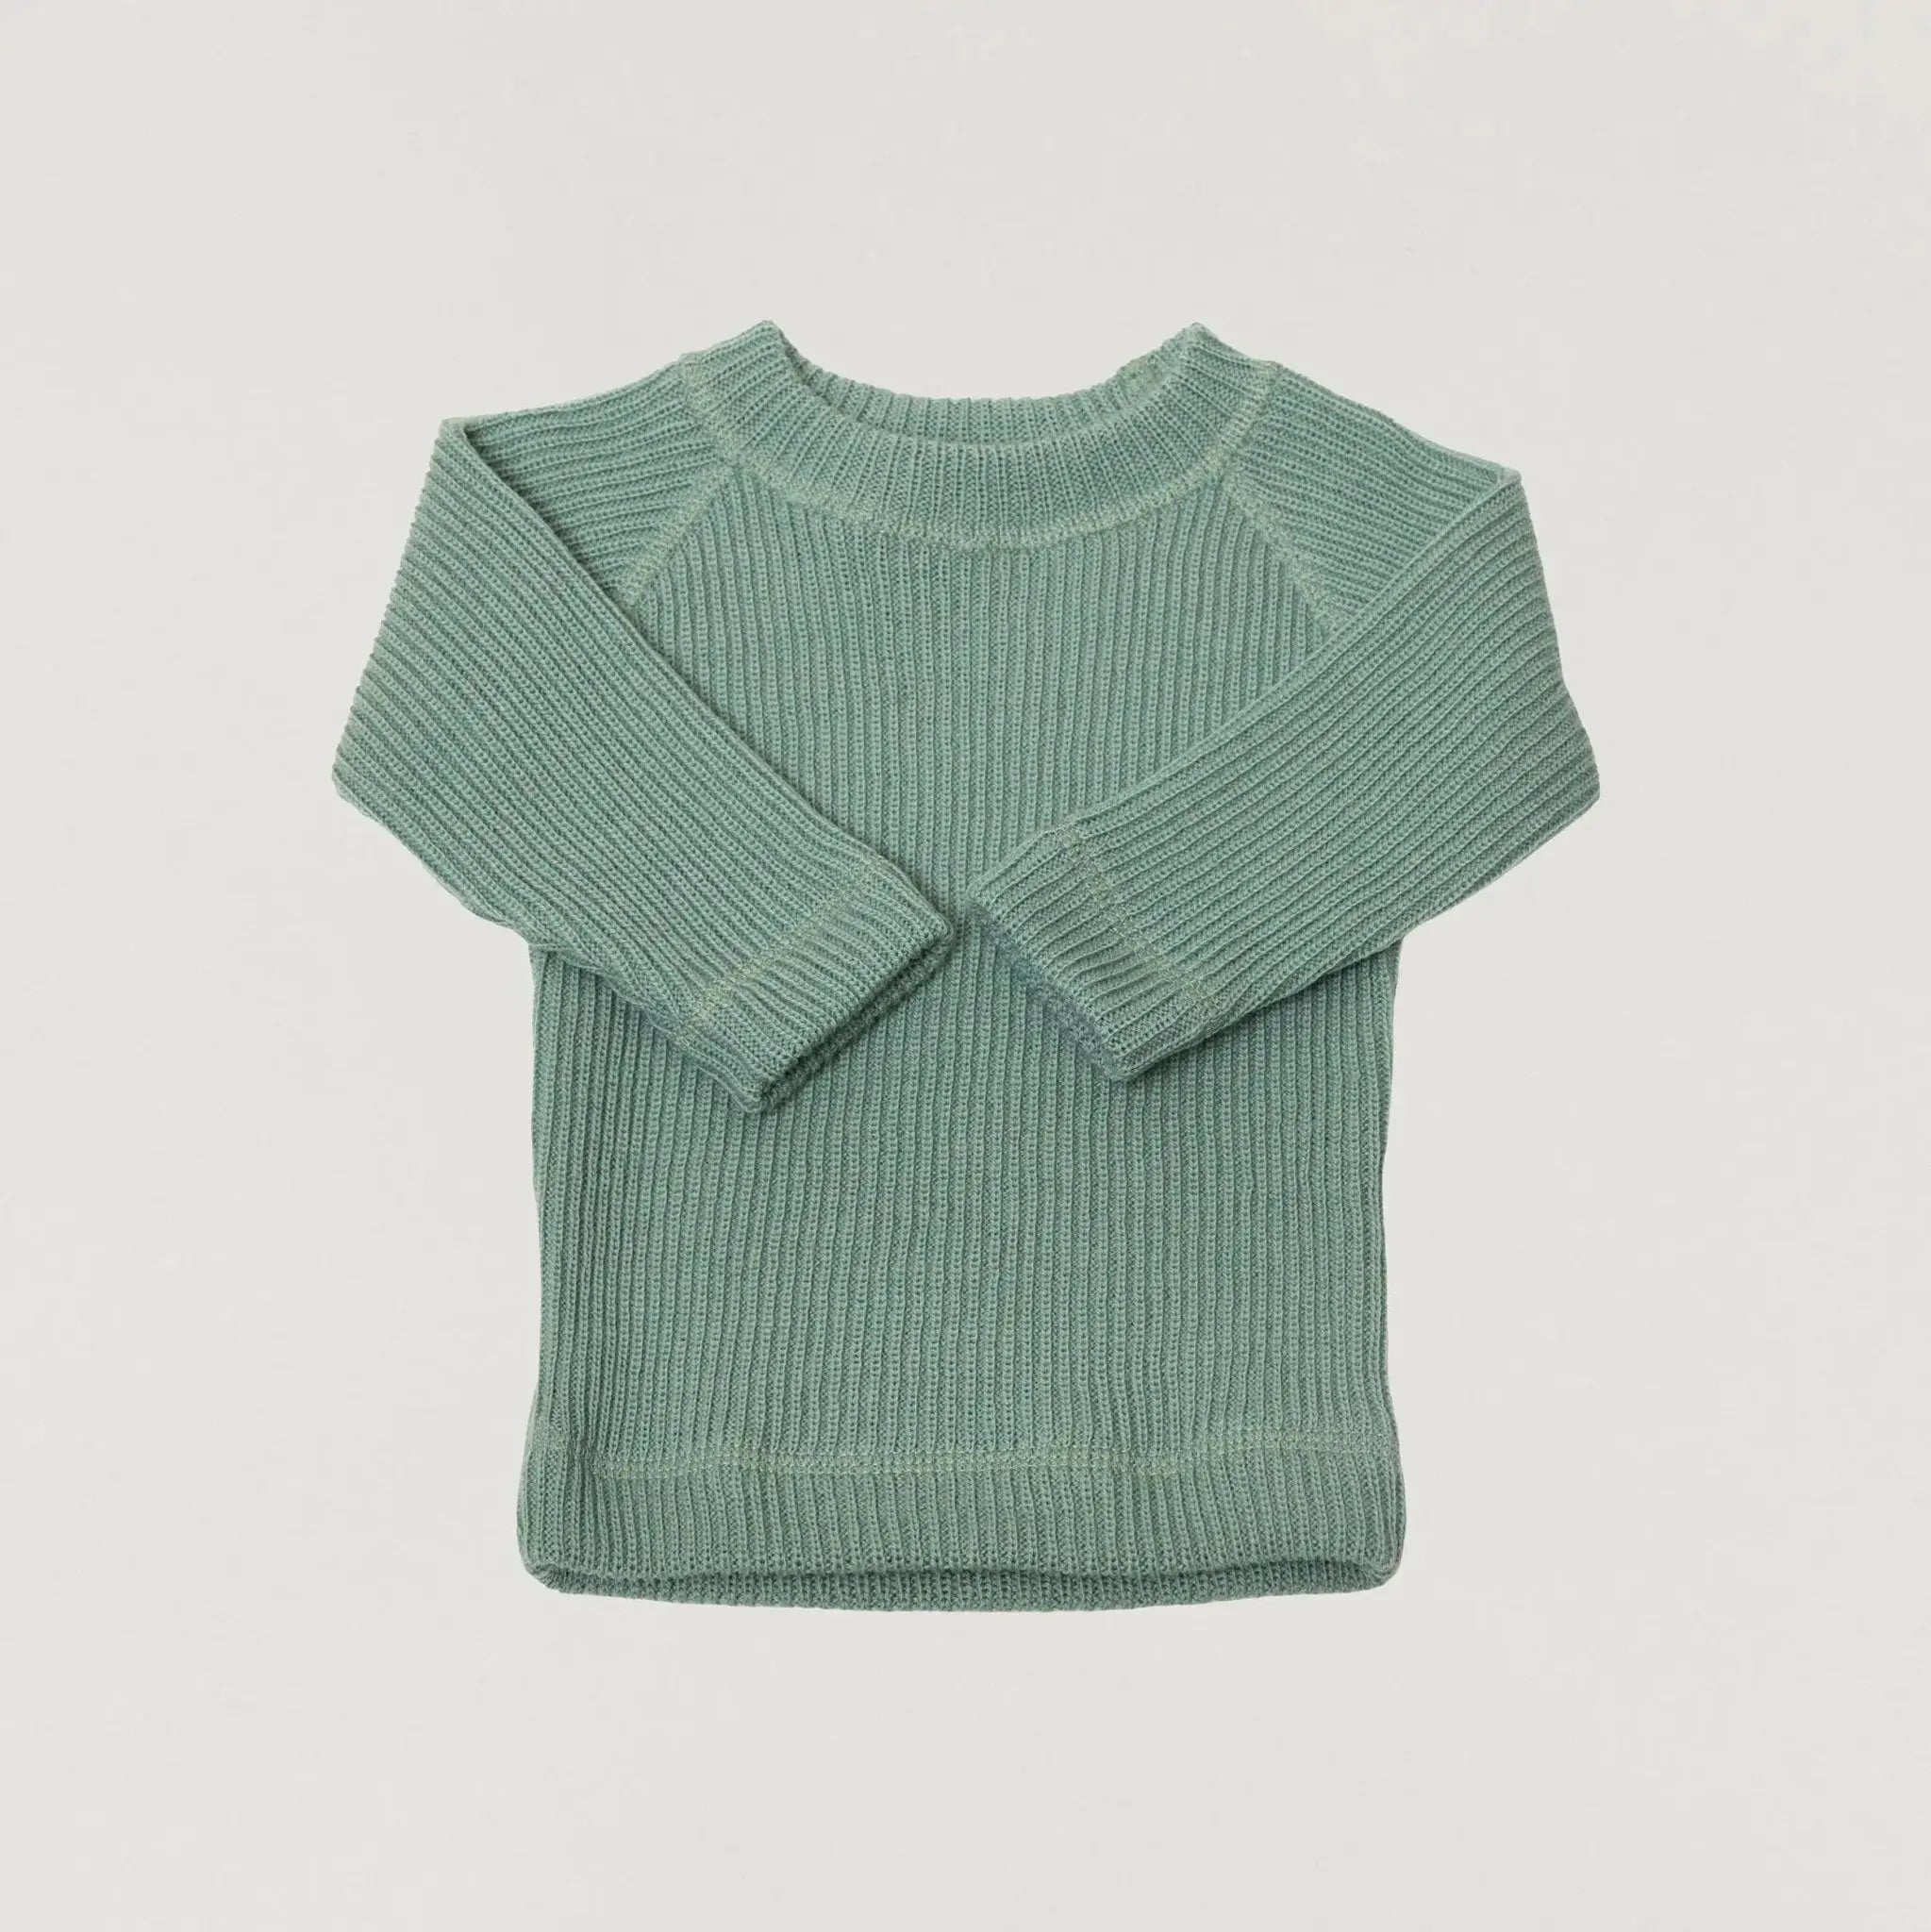 Babybox and Family Joha Rippstrickpullover aus Wolle 56/62 sage-jh #farbe_56/62